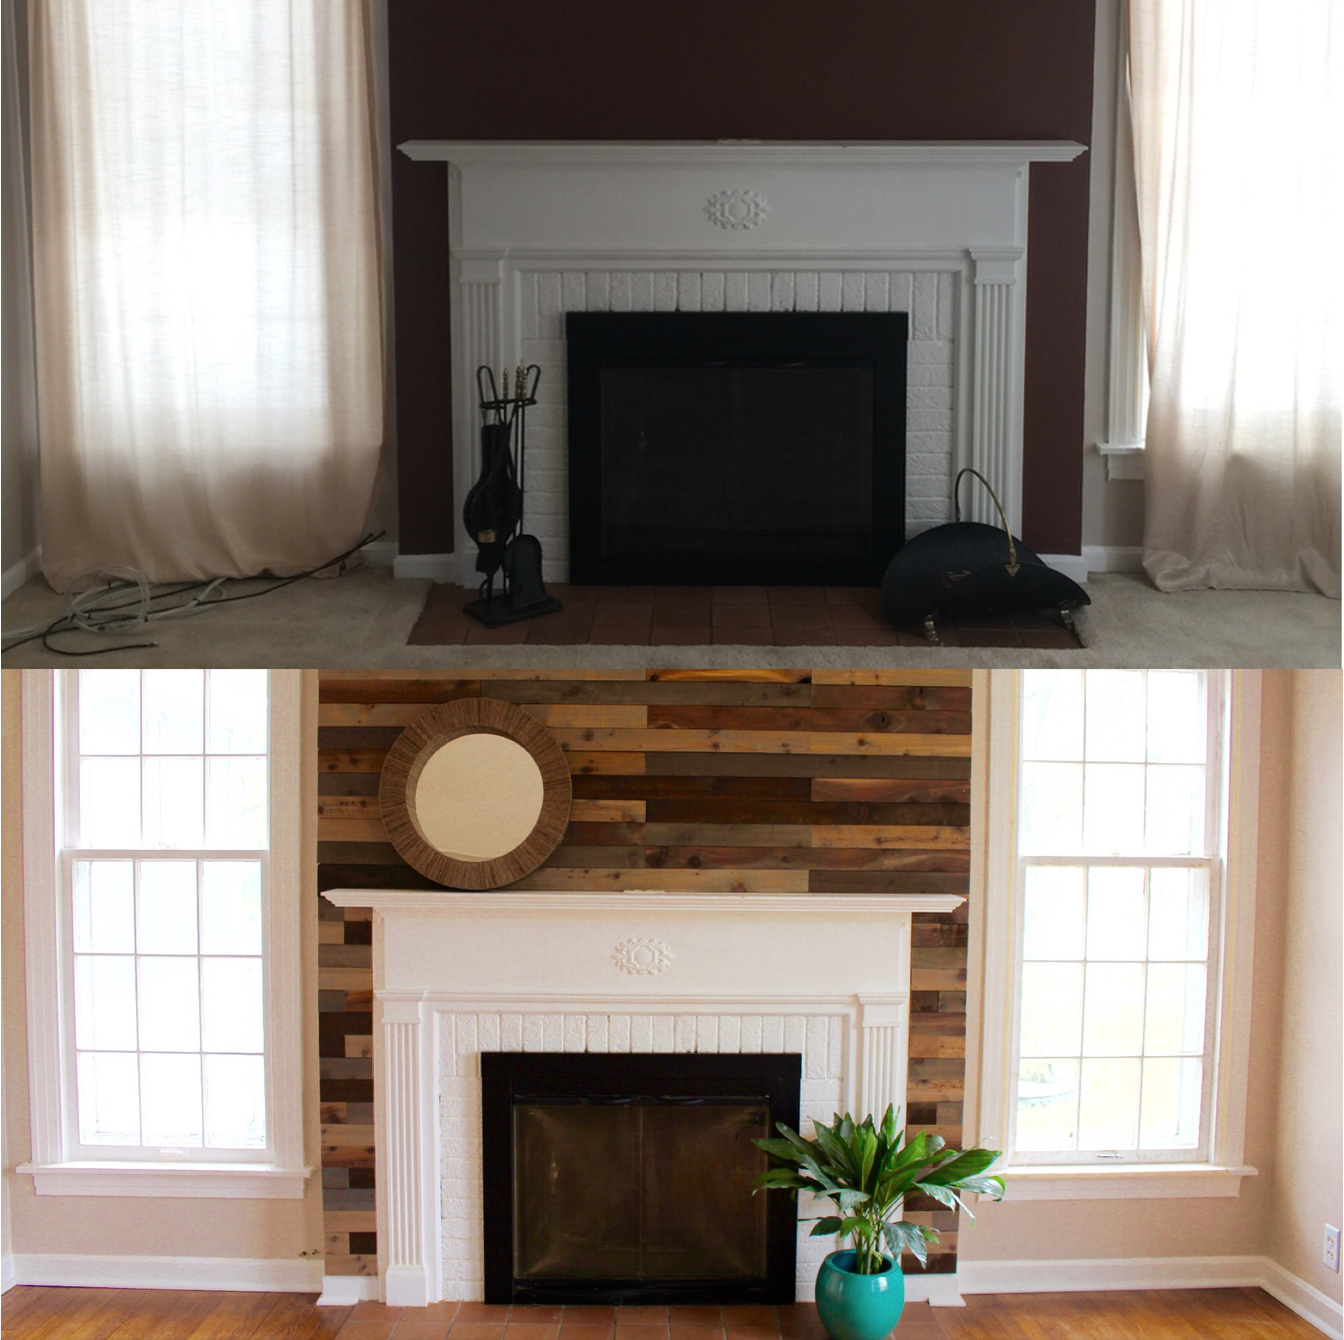 Fireplace Before and after update.